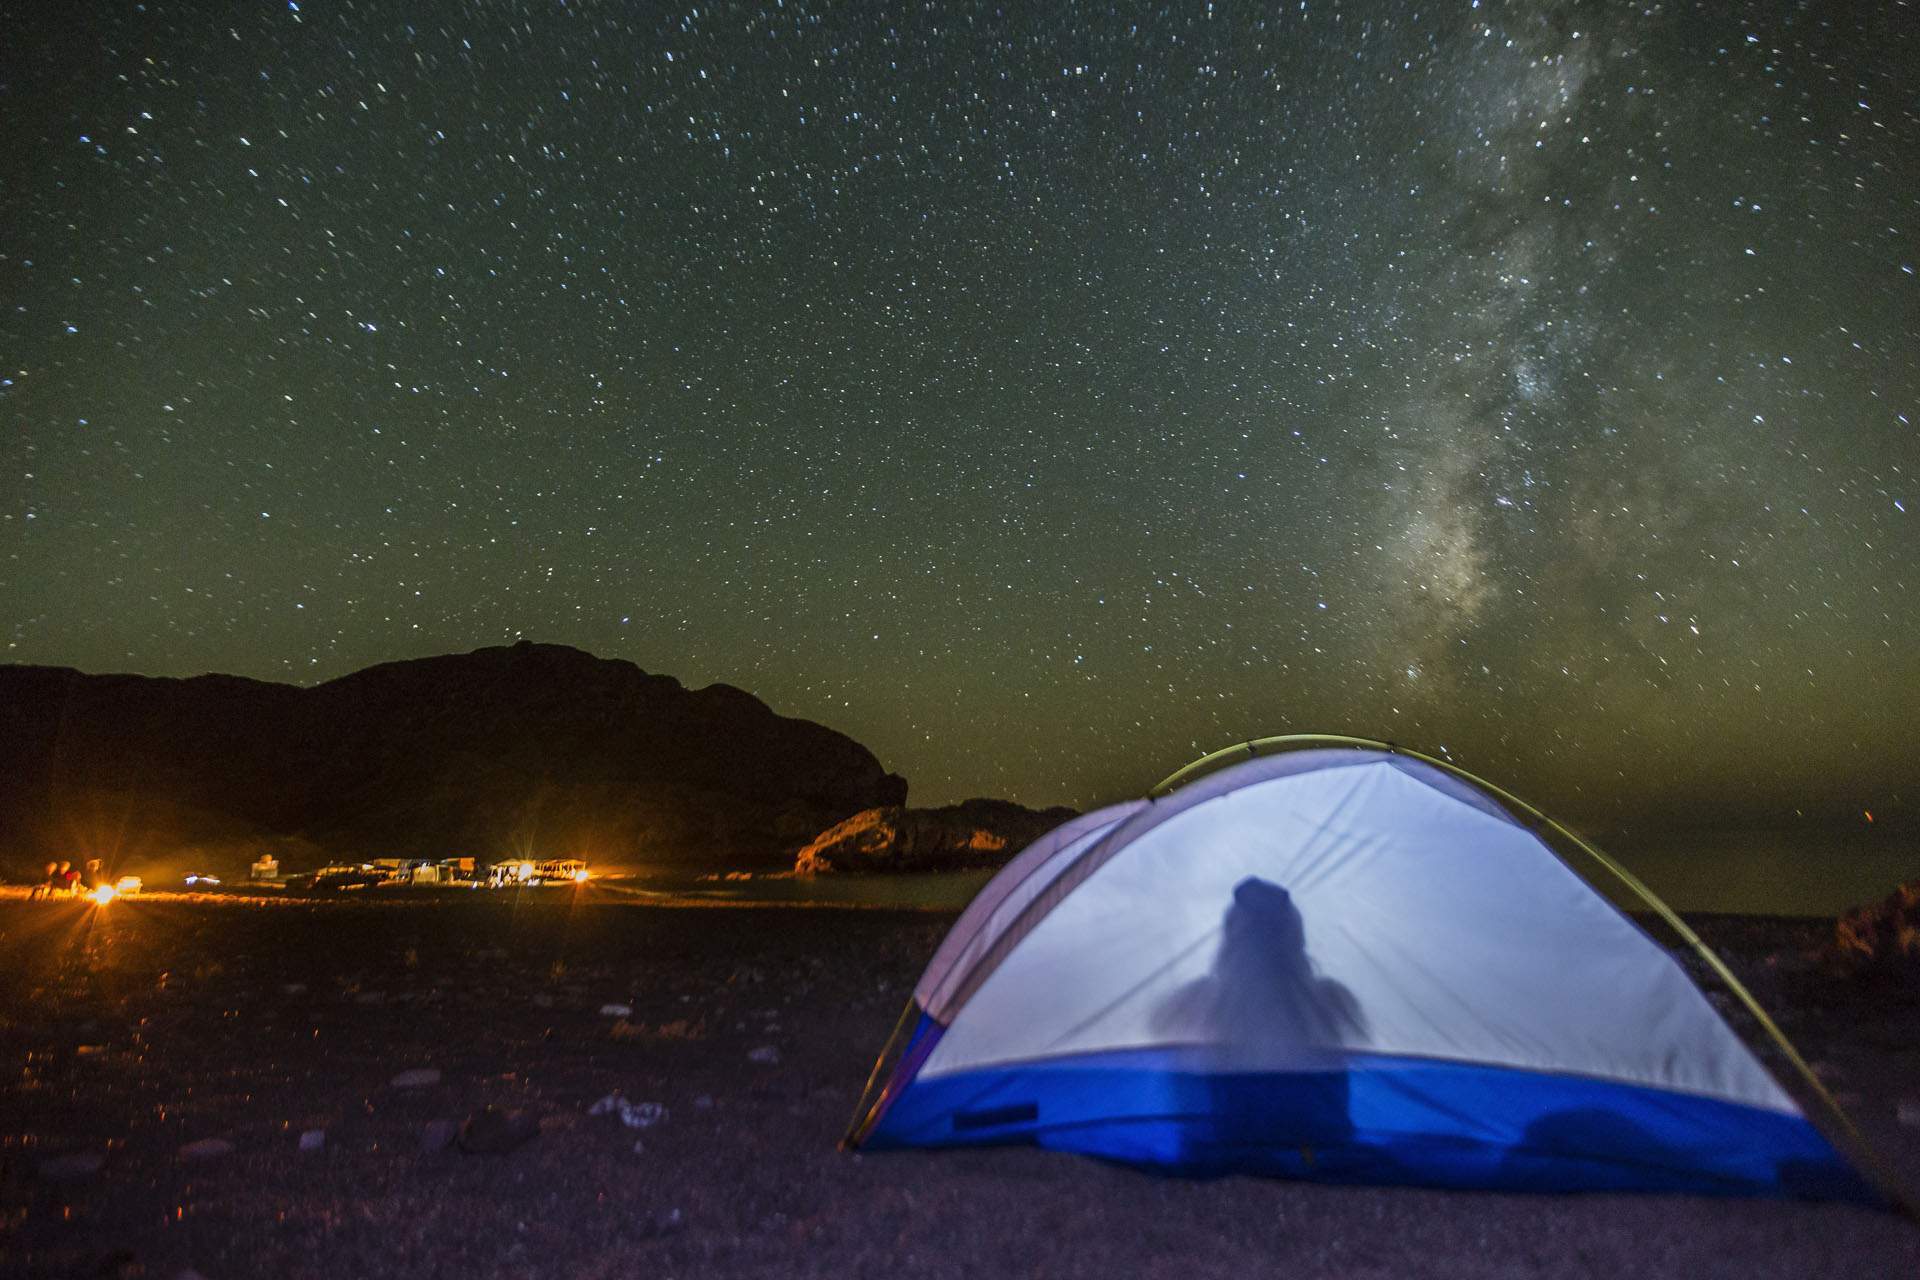 Night view of the Milky Way with lit up tent in foreground, Himalaya Beach, Sonora, Mexico, North America